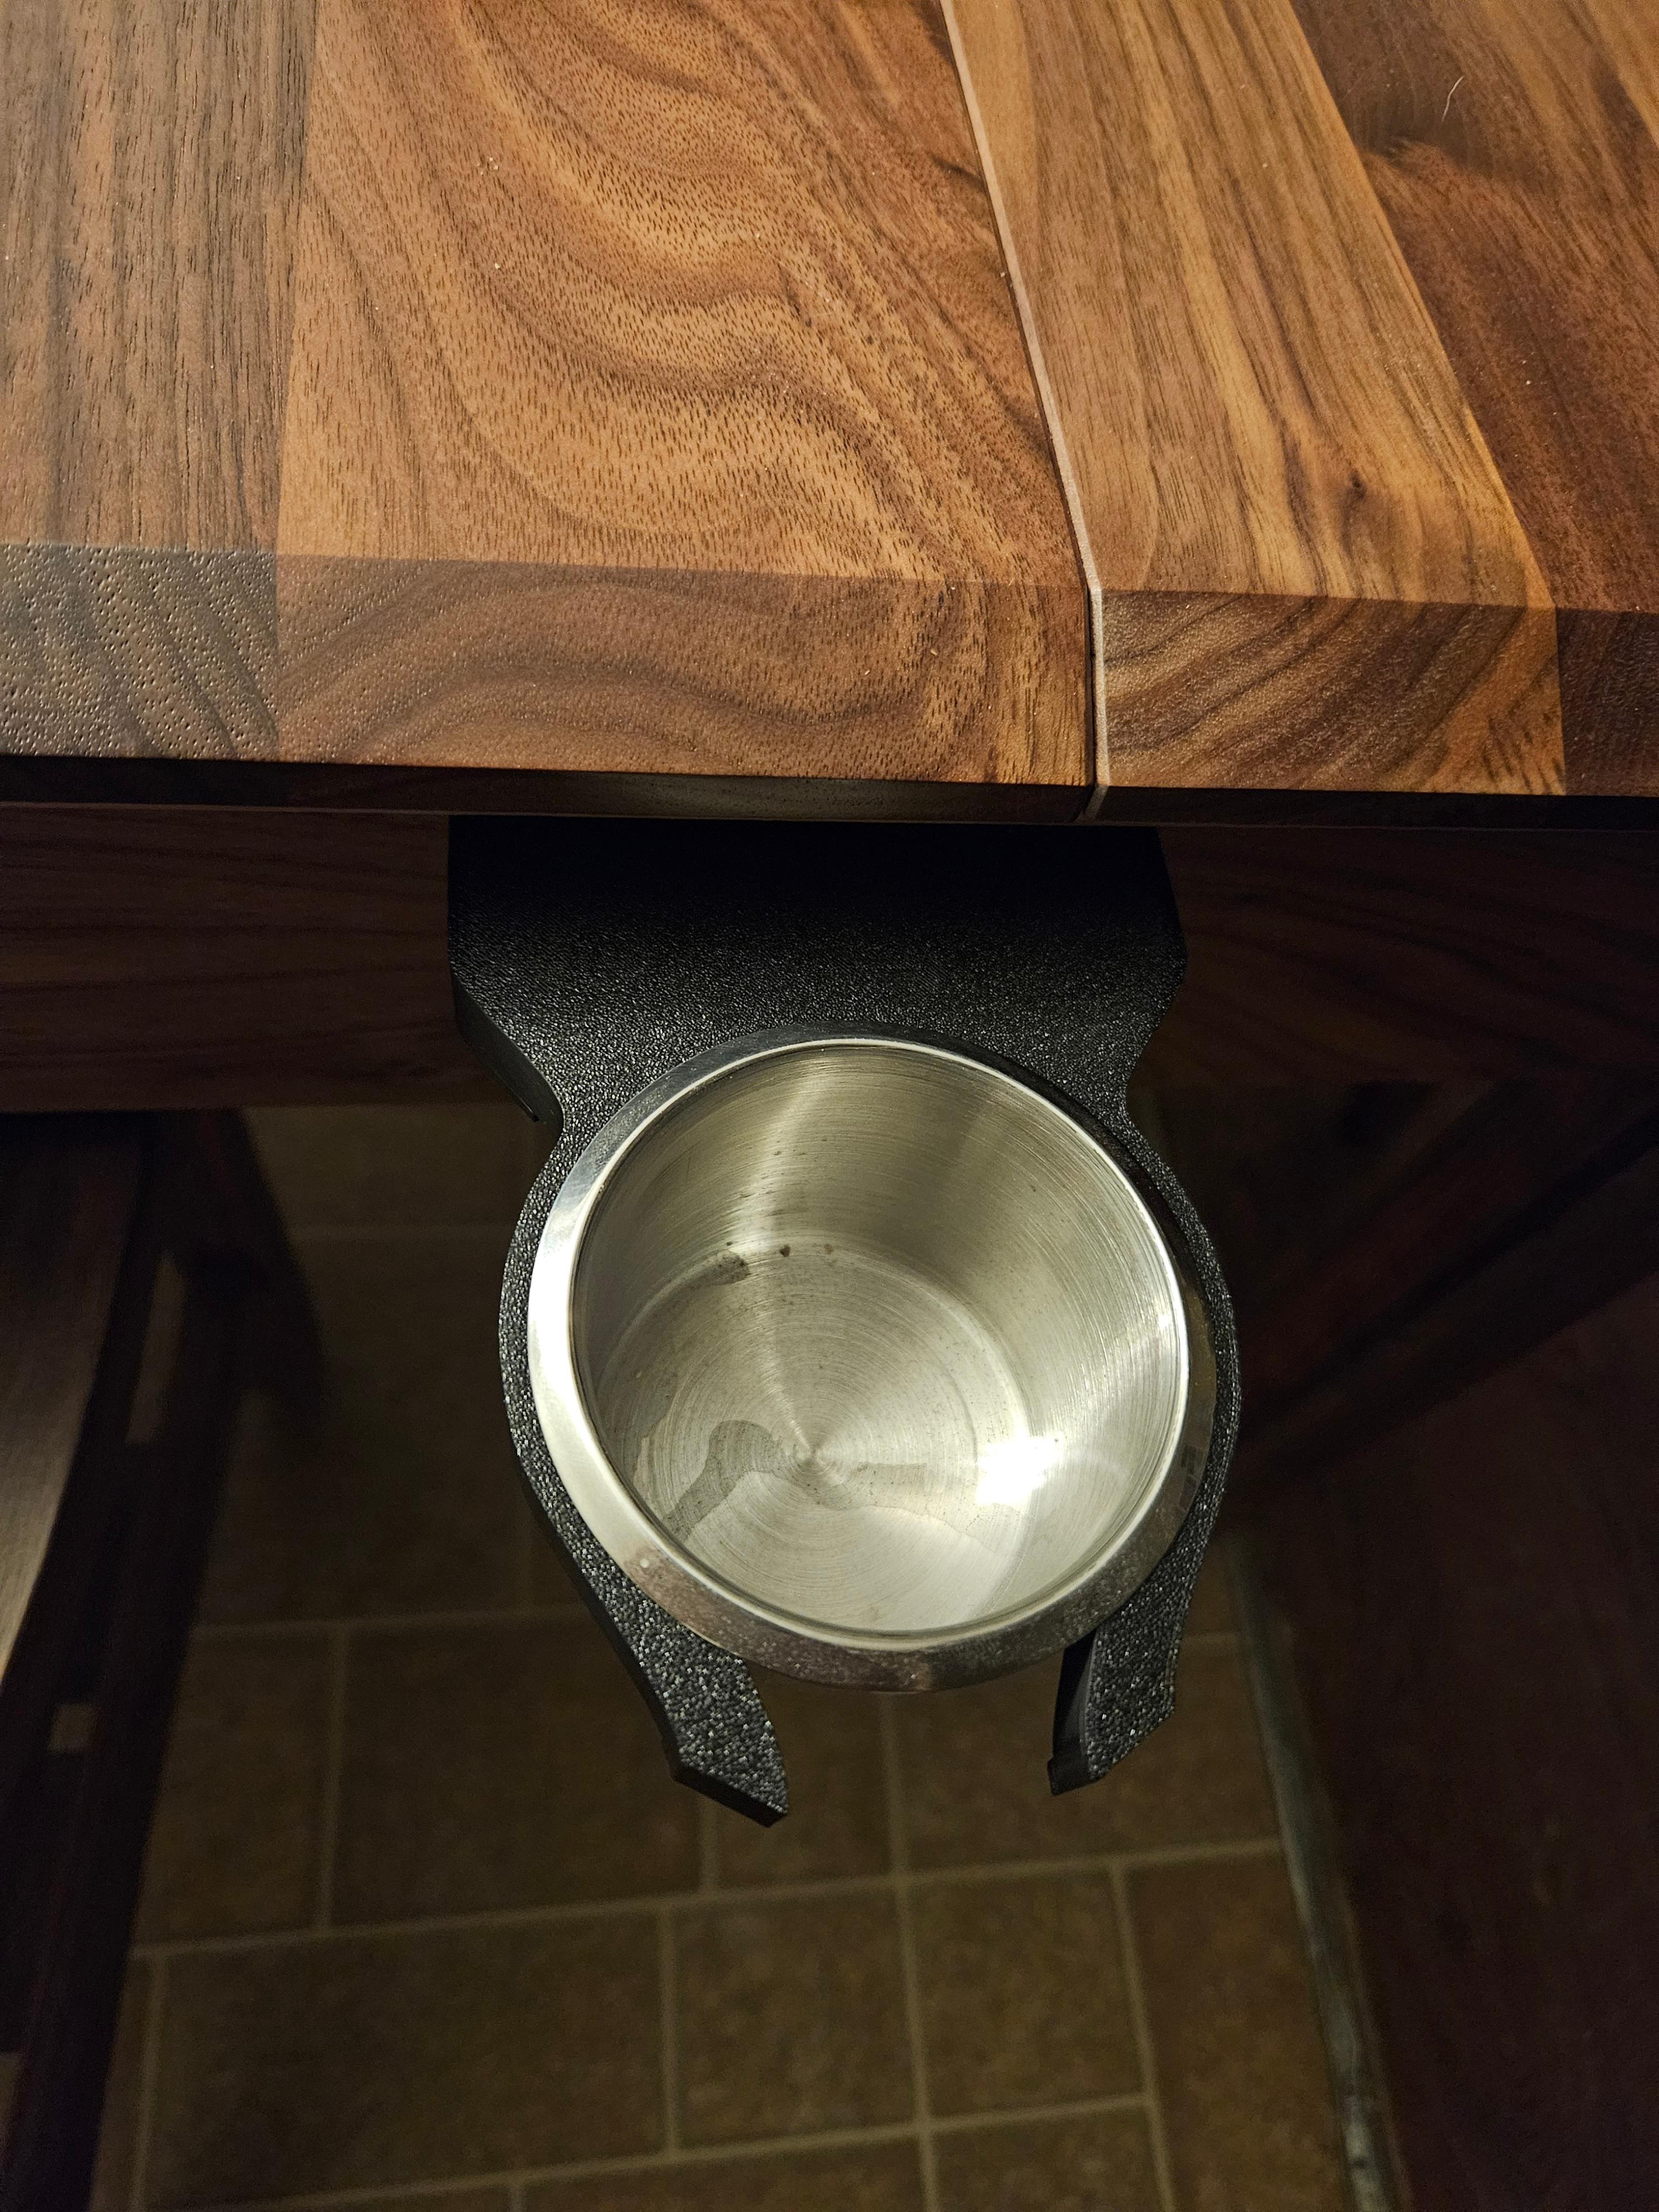 Wyrmwood Table Accessory - Hex tile cup holder.stl 3d model